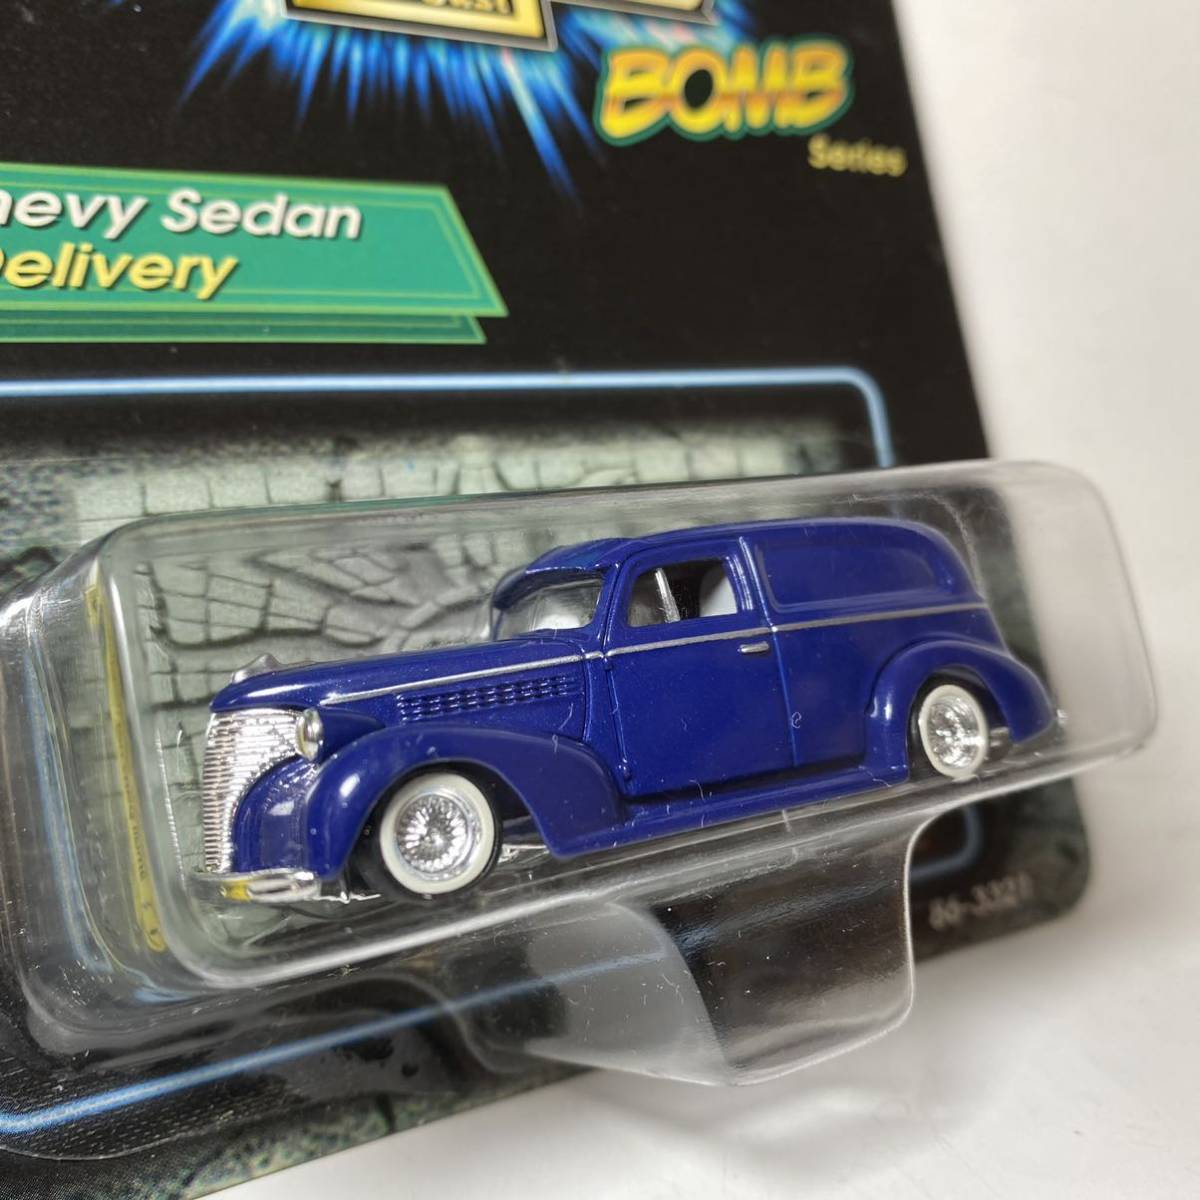 Revell 1/64 LOWRIDERS DieCast BOMB series \'39 CHEVY SEDAN DELIVERY Chevy Delivery Lowrider 